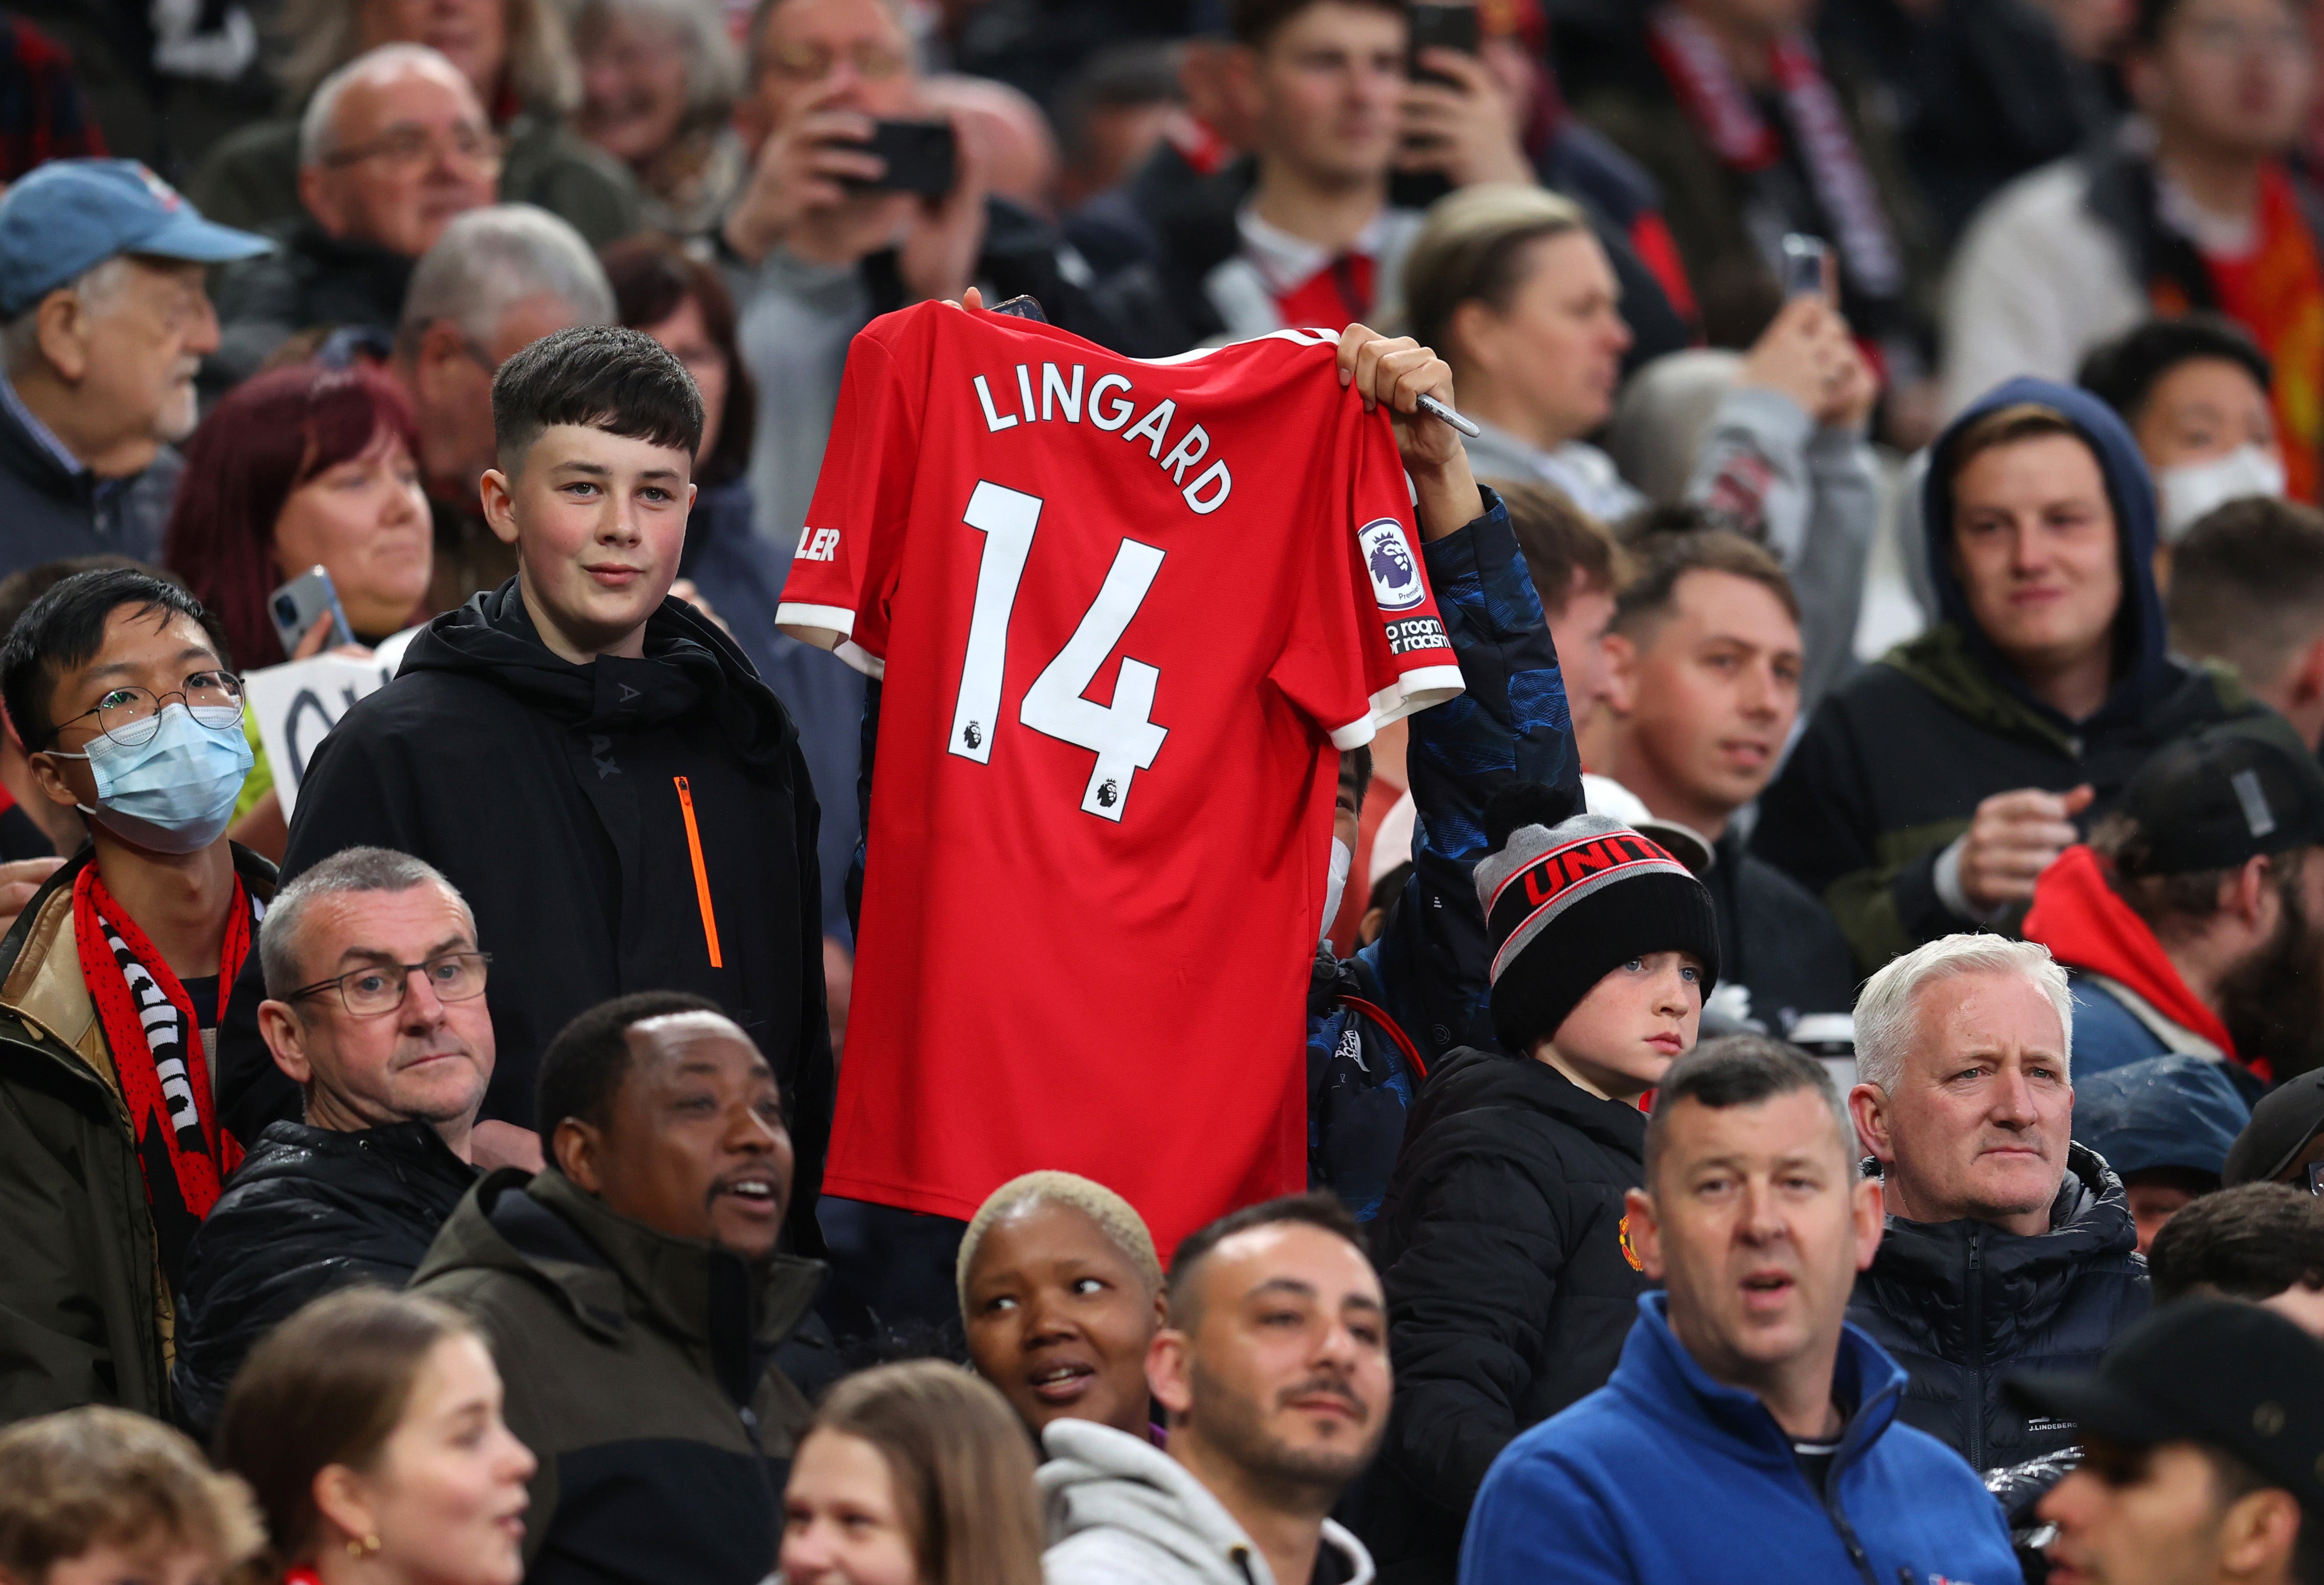 Jesse Lingard was an unused sub against Brentford in Man Utd’s final home game of the season